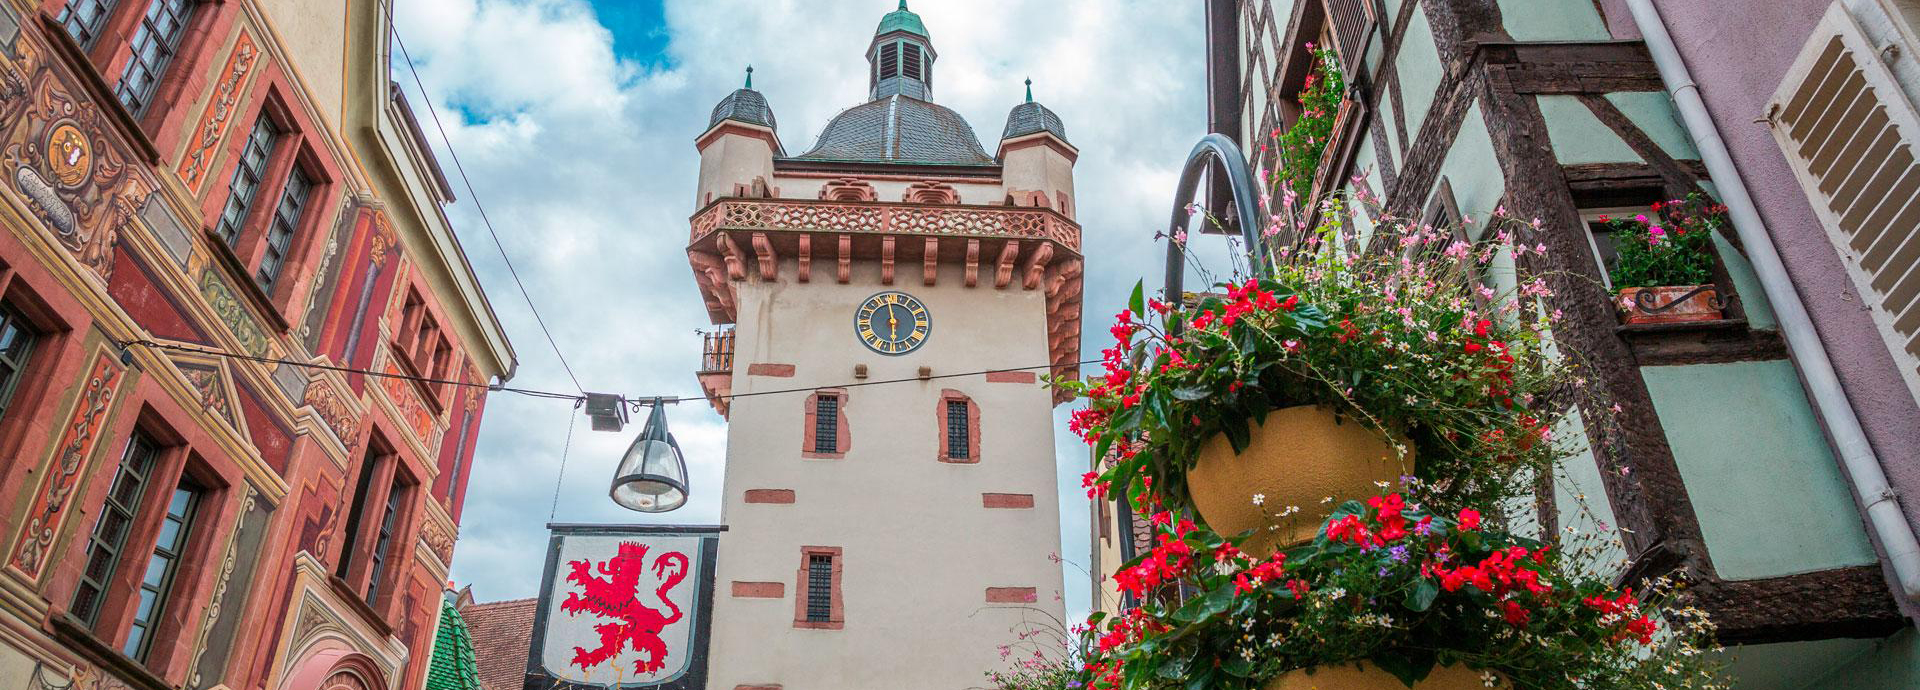 Sélestat is a city ideally located in the Bas-Rhin, in Alsace